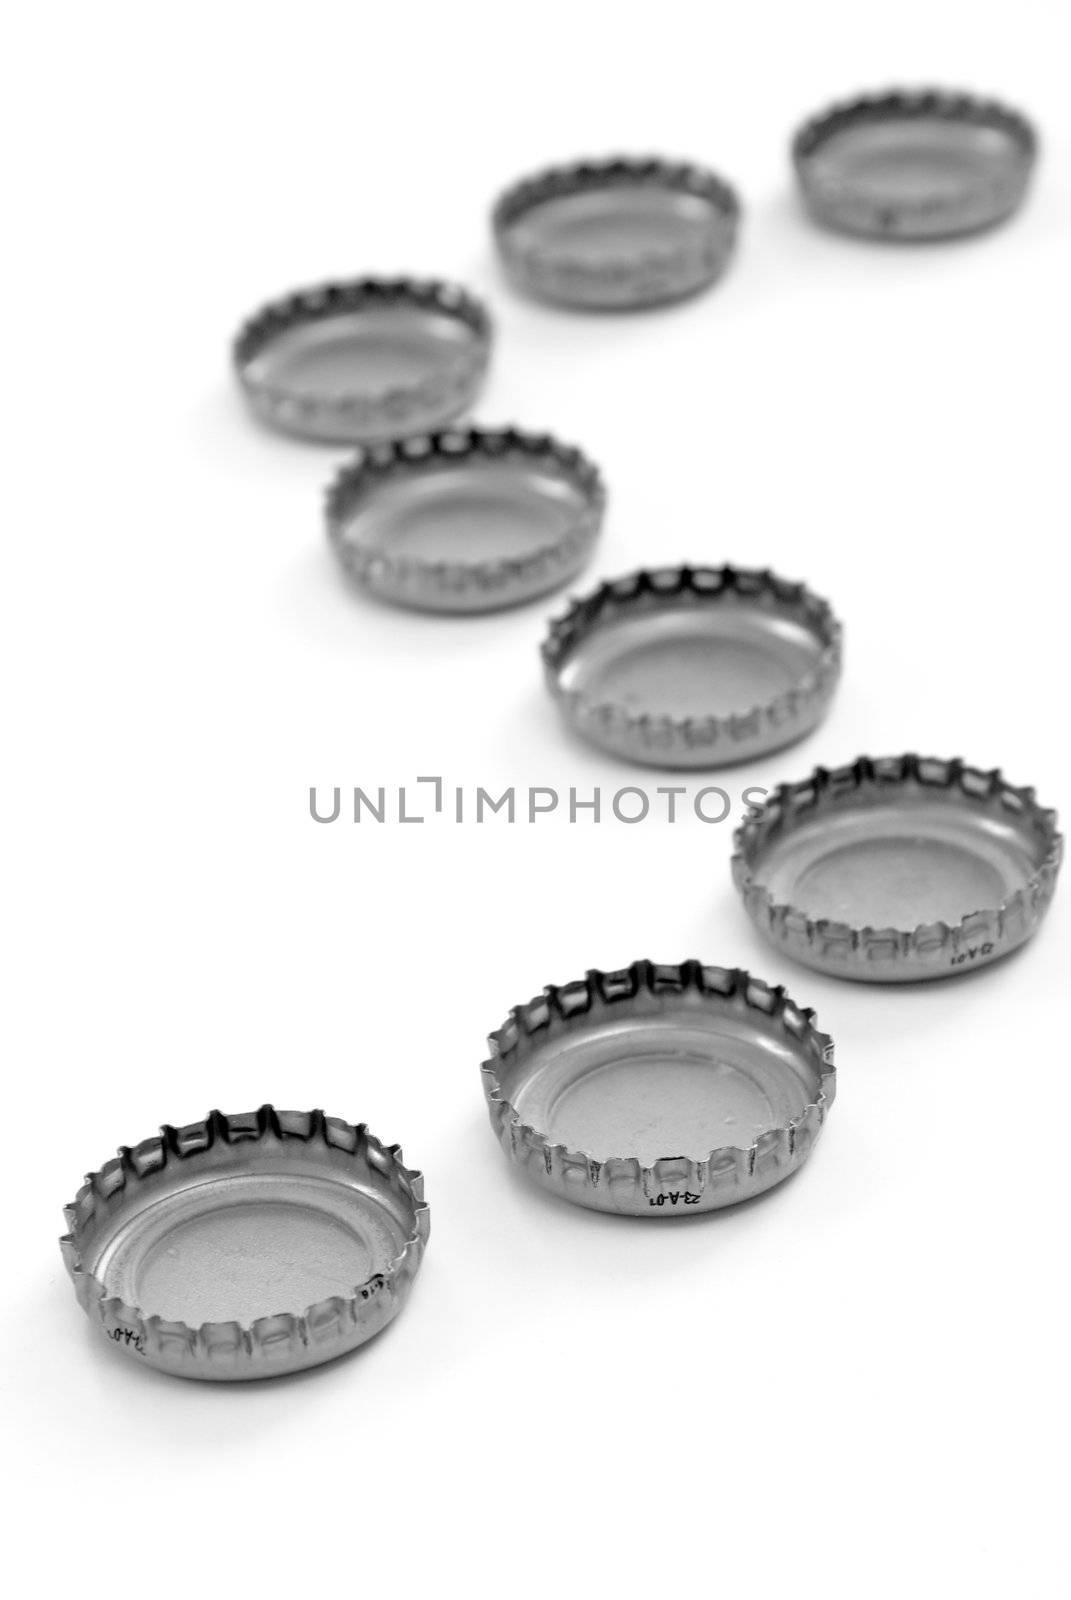 A line made of bottle caps, isolated on white.